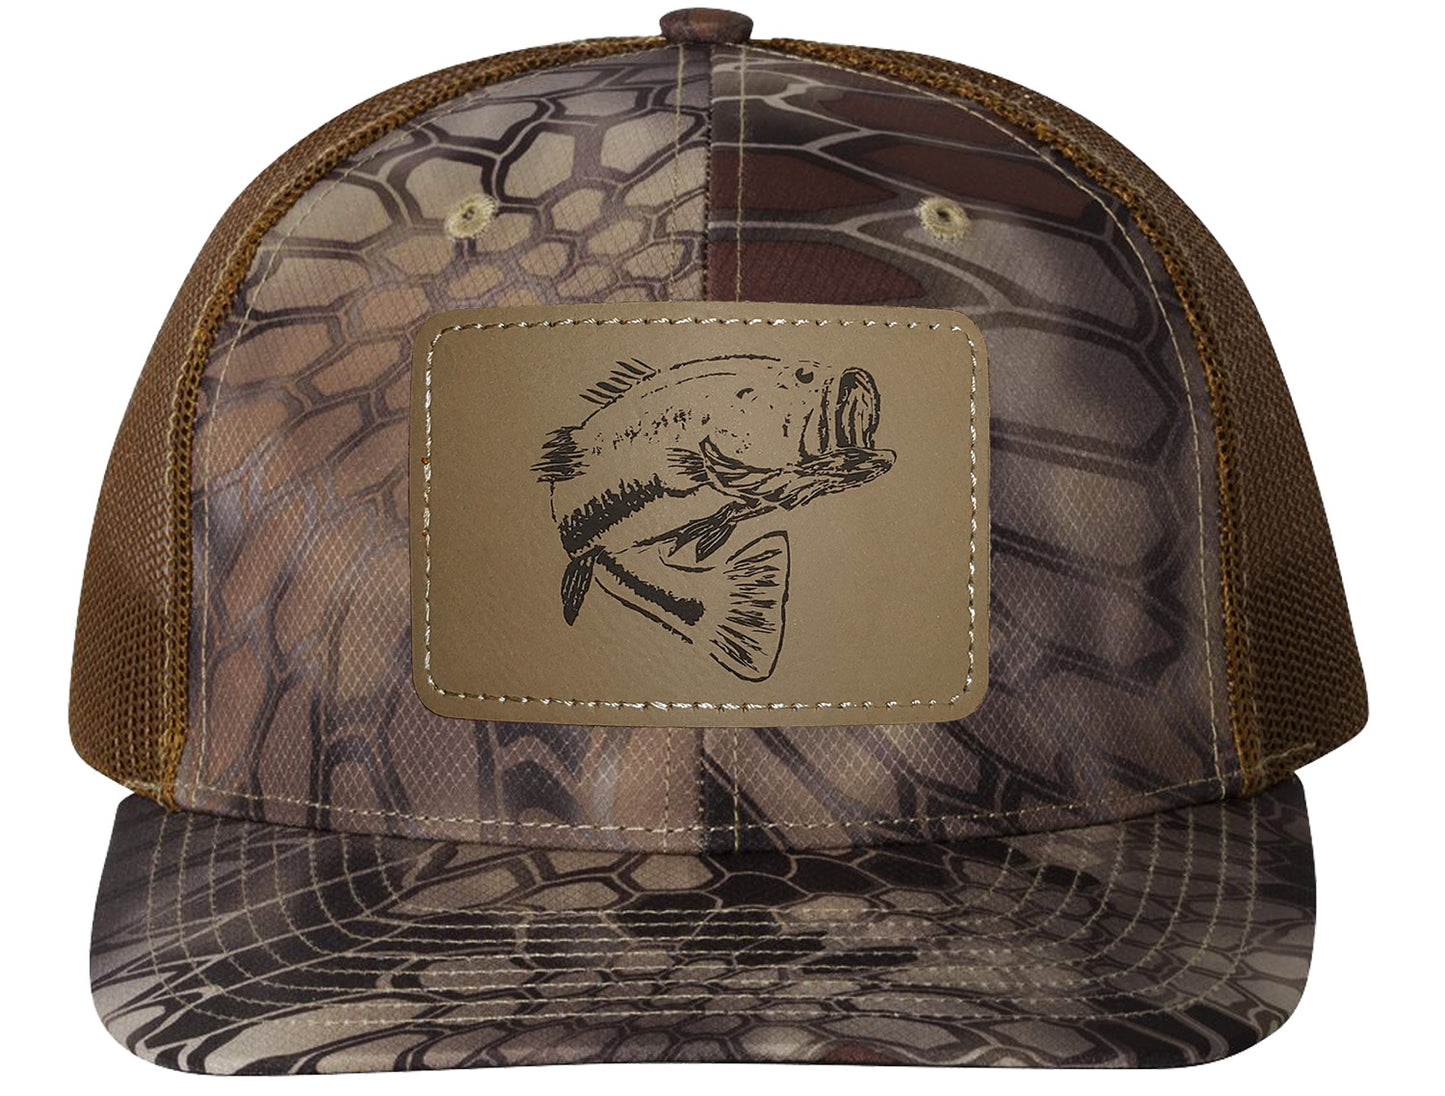 New! Bass Leather Patch Structured Trucker Hats